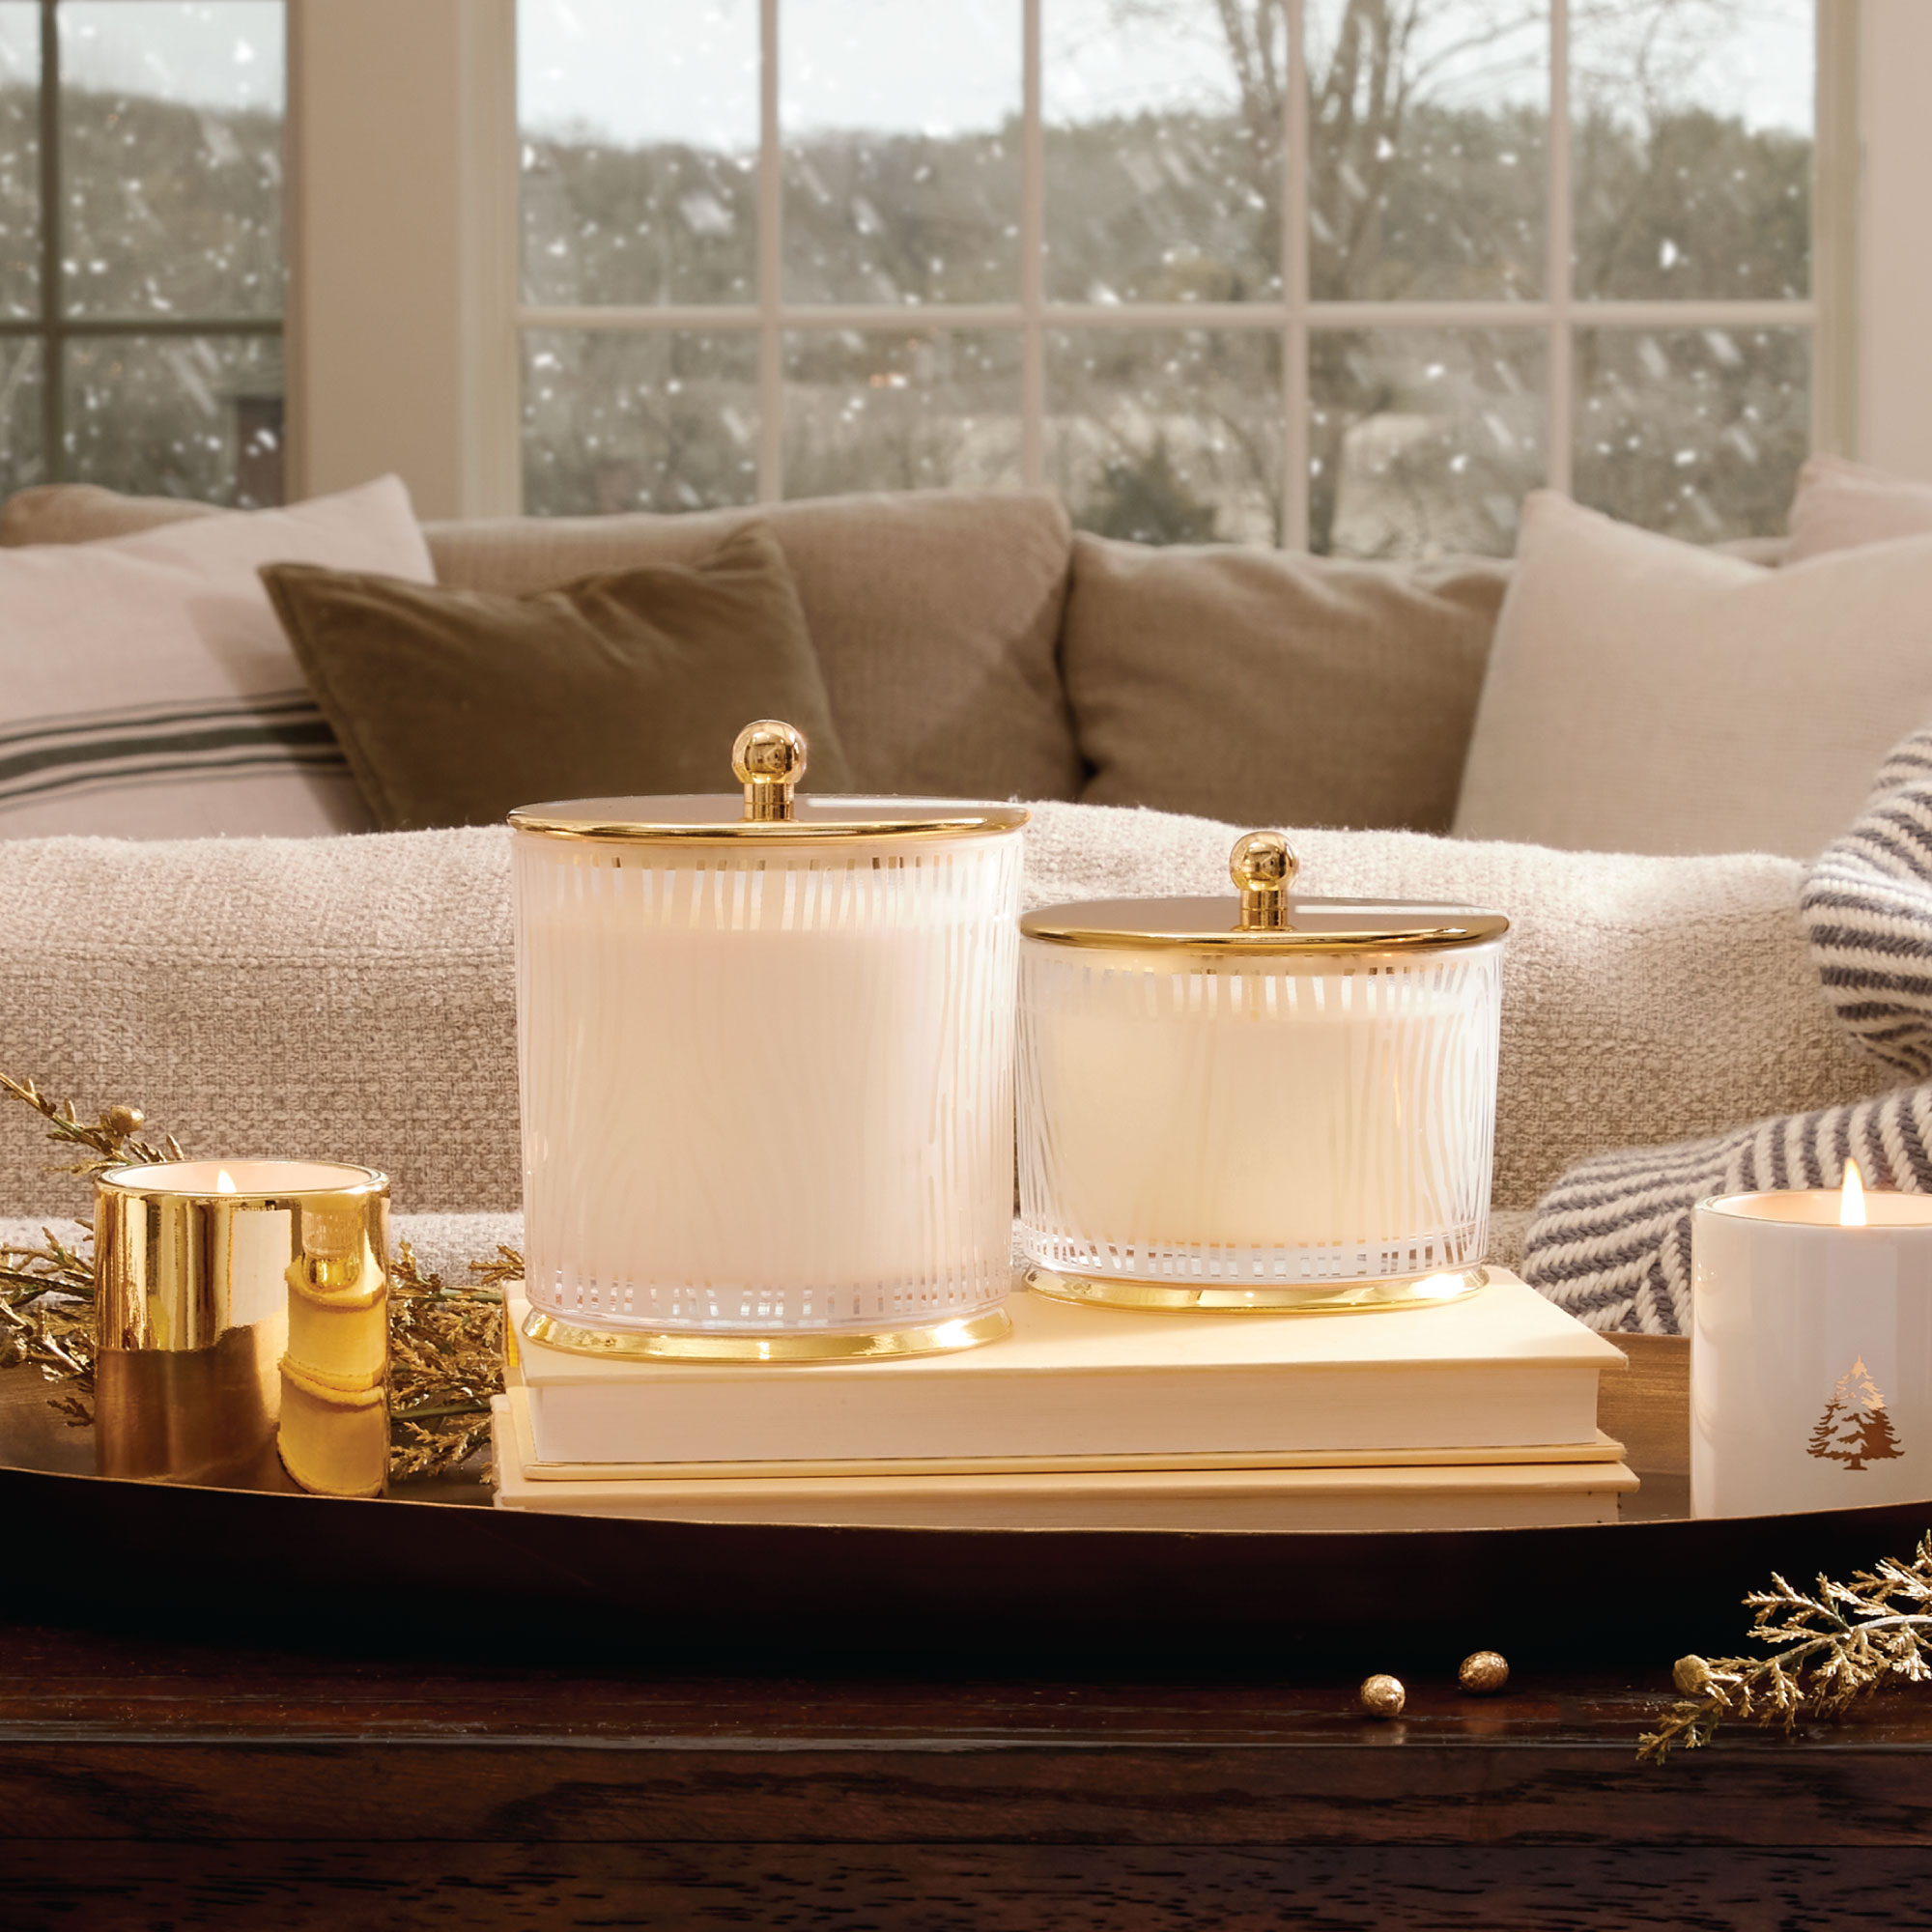 Thymes Gilded Frasier Fir Frosted Wood Grain Candle – Independent Interiors